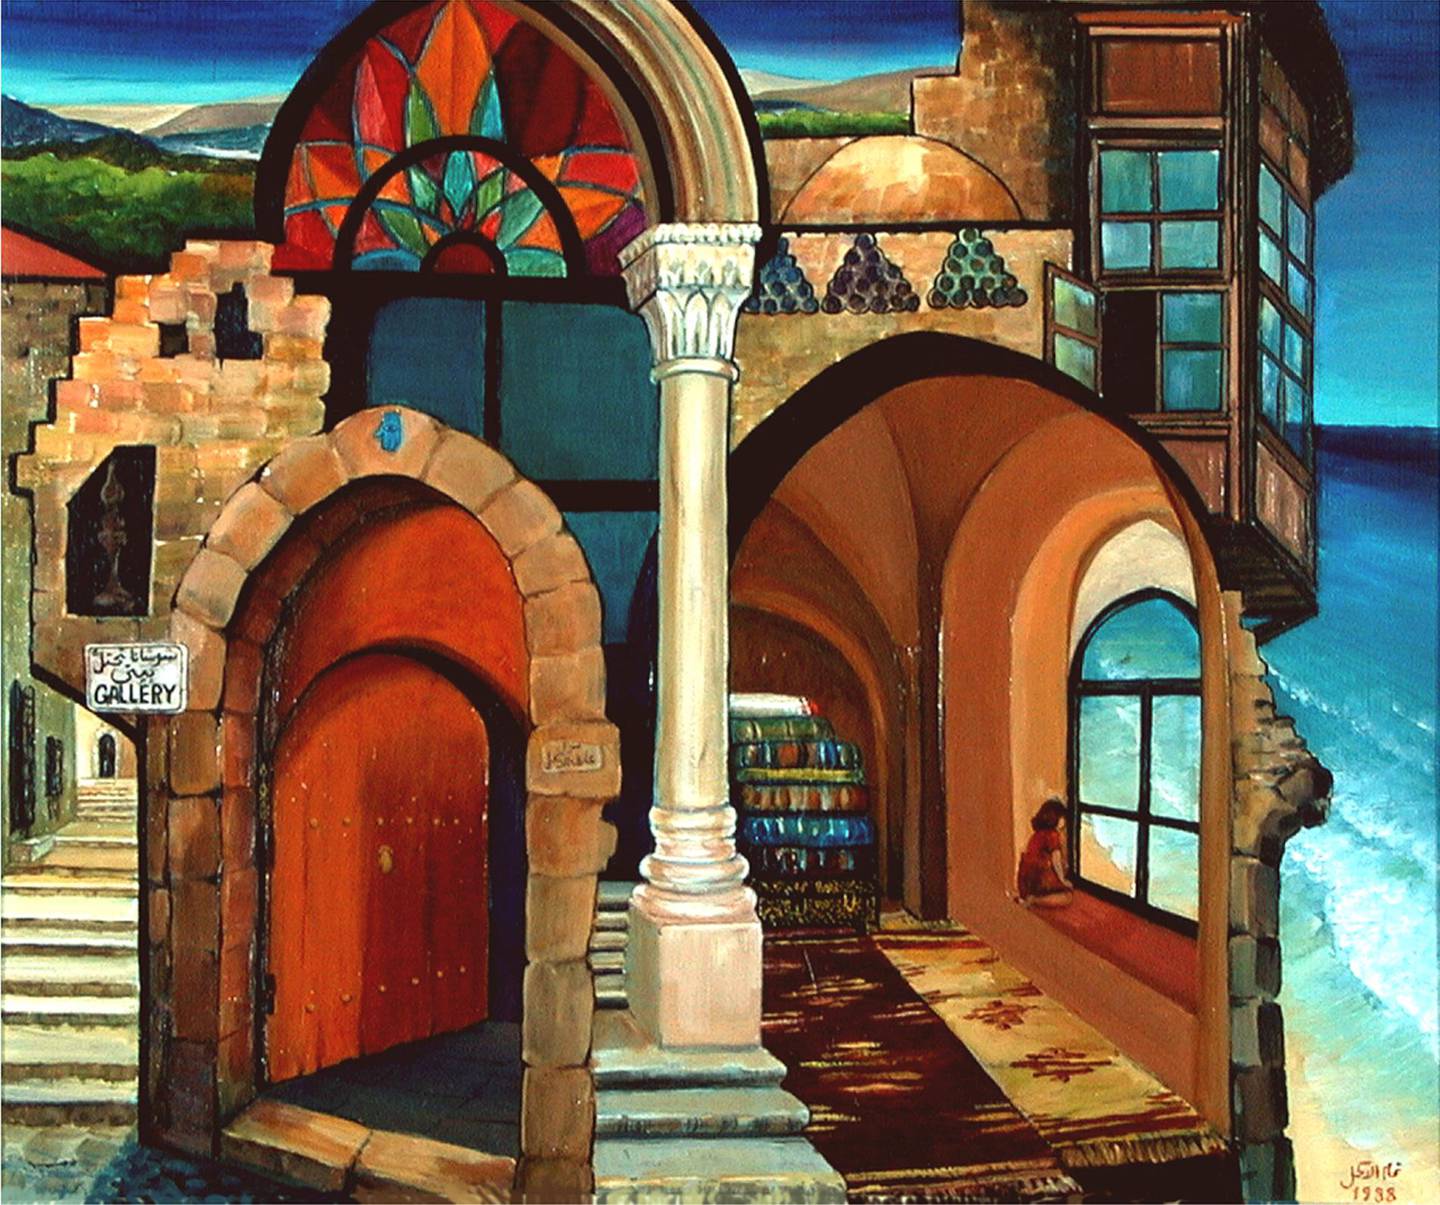 Tamam El-Akhal's "Shushana Occupies My House" (1988), painted while the artist was living in Kuwait